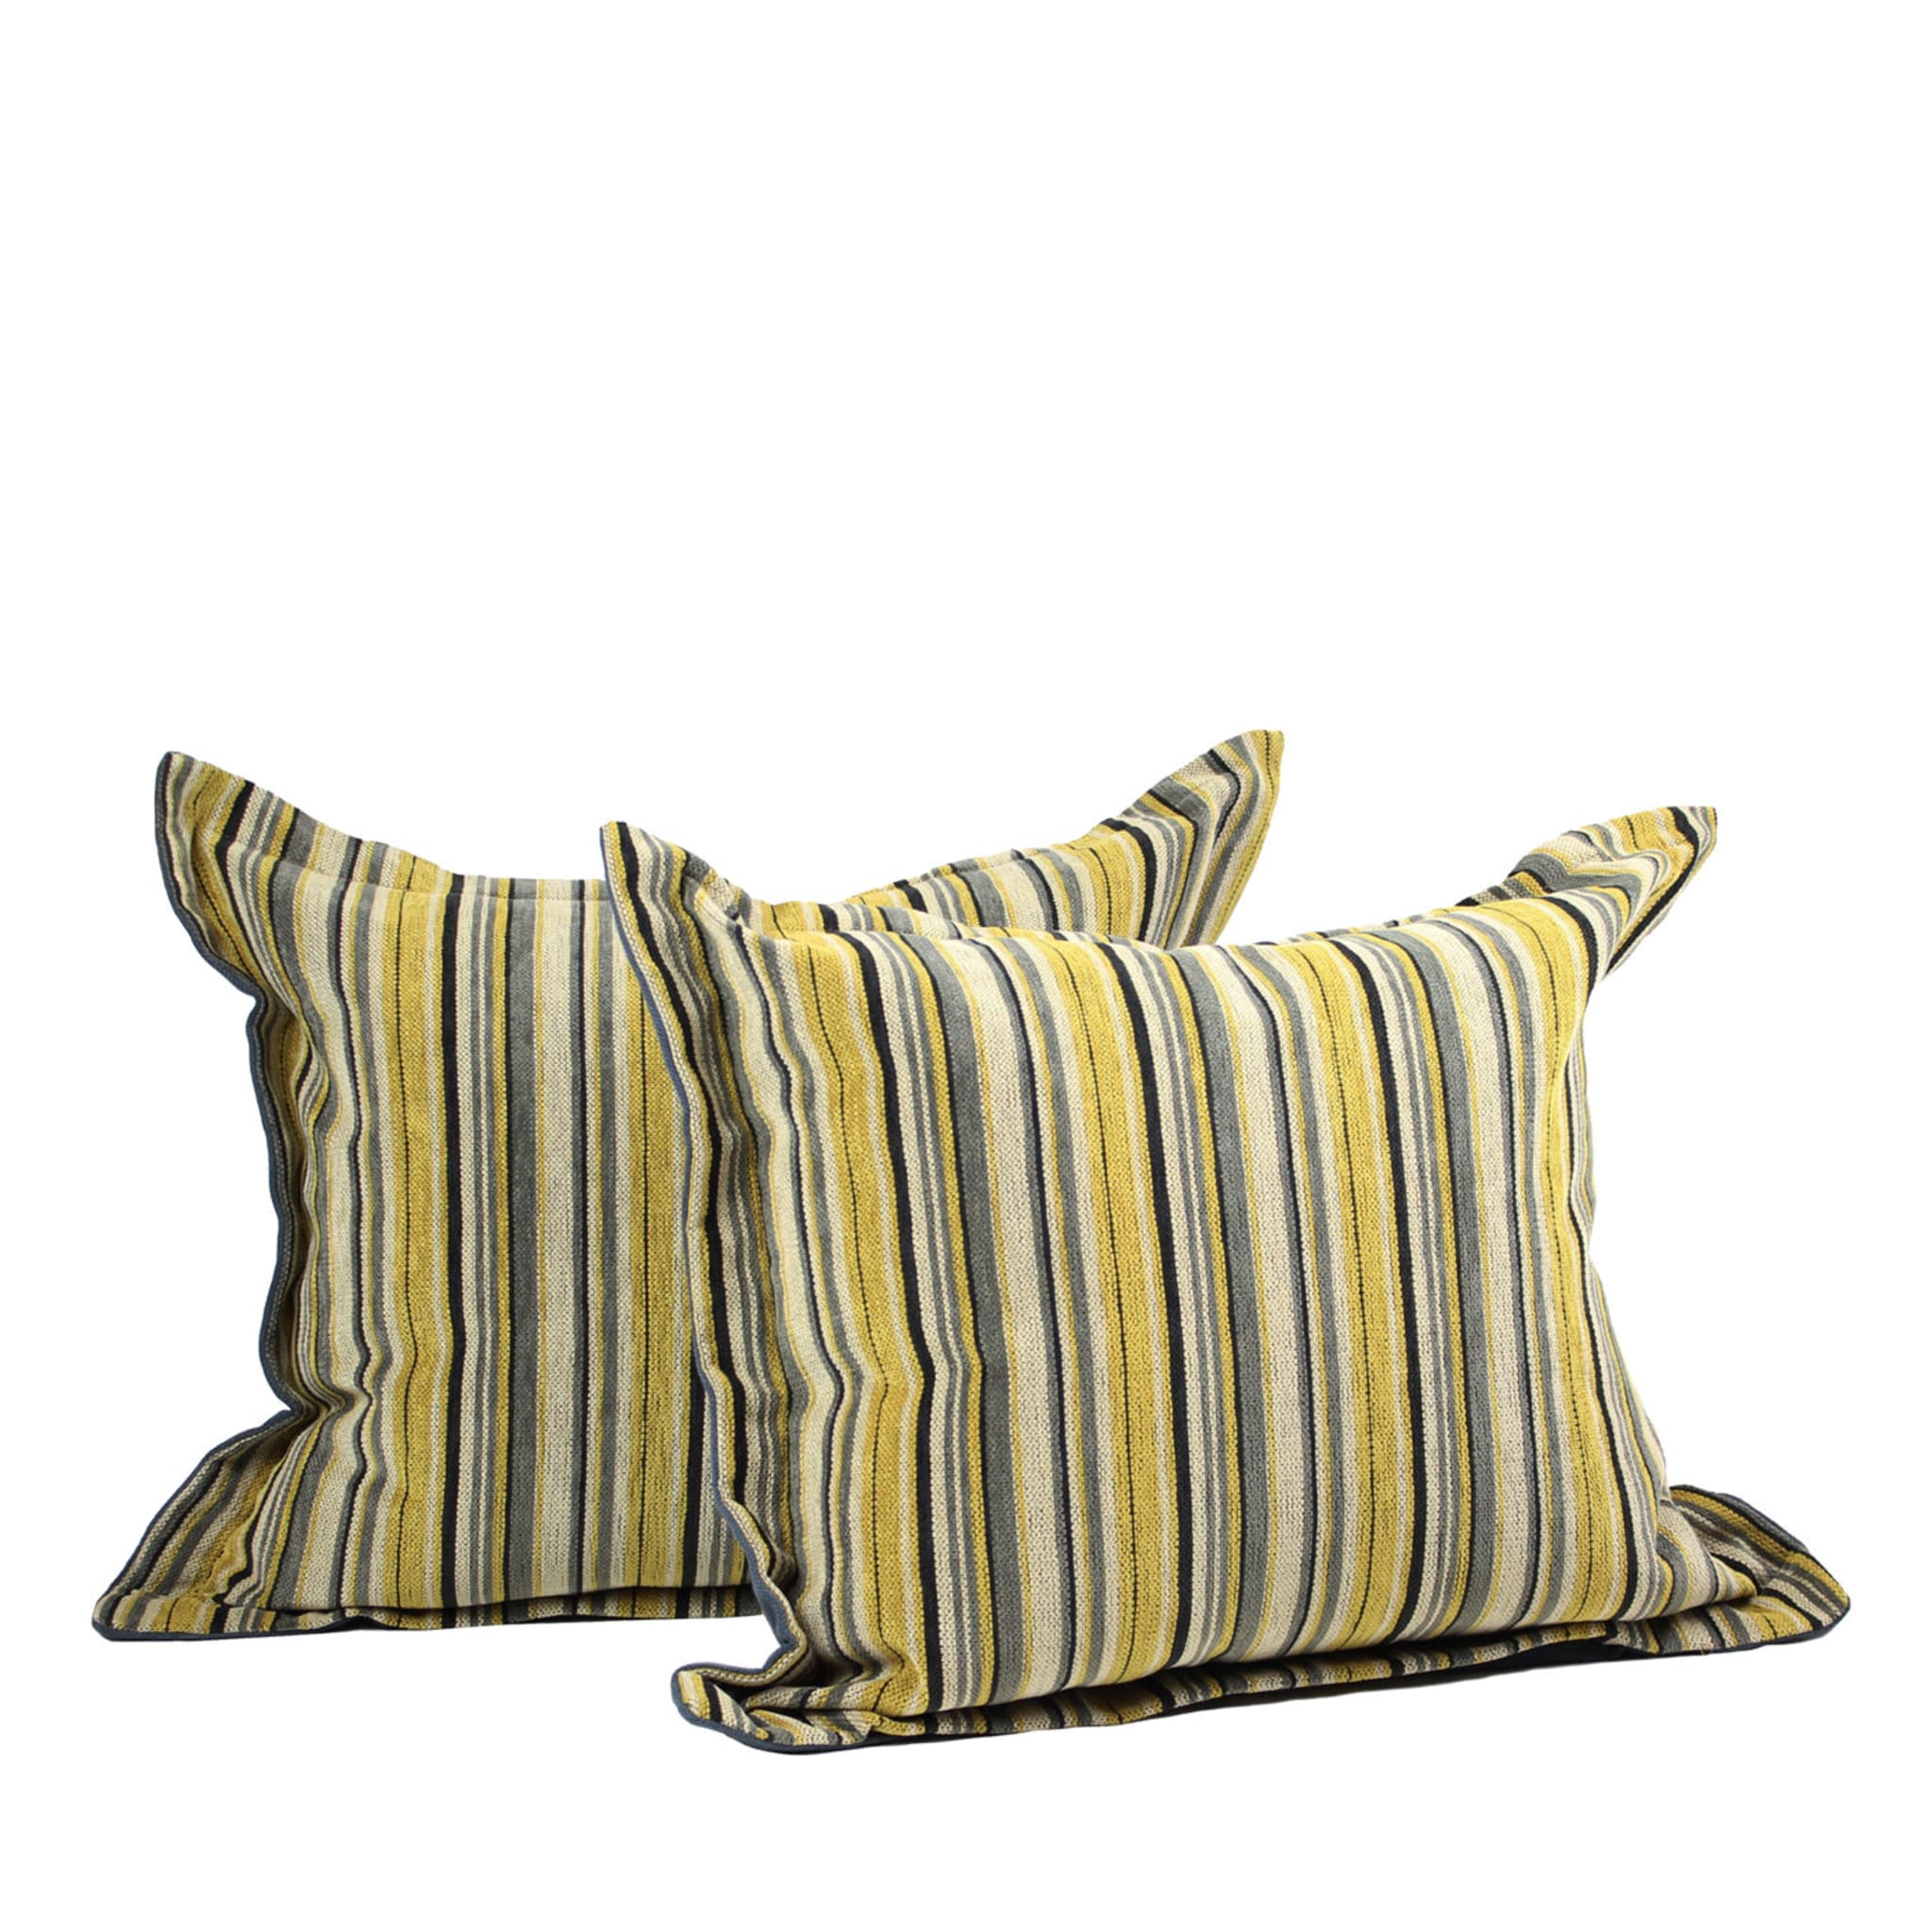 Set of 2 Over-Sized Mustard Lush Cushions  - Main view